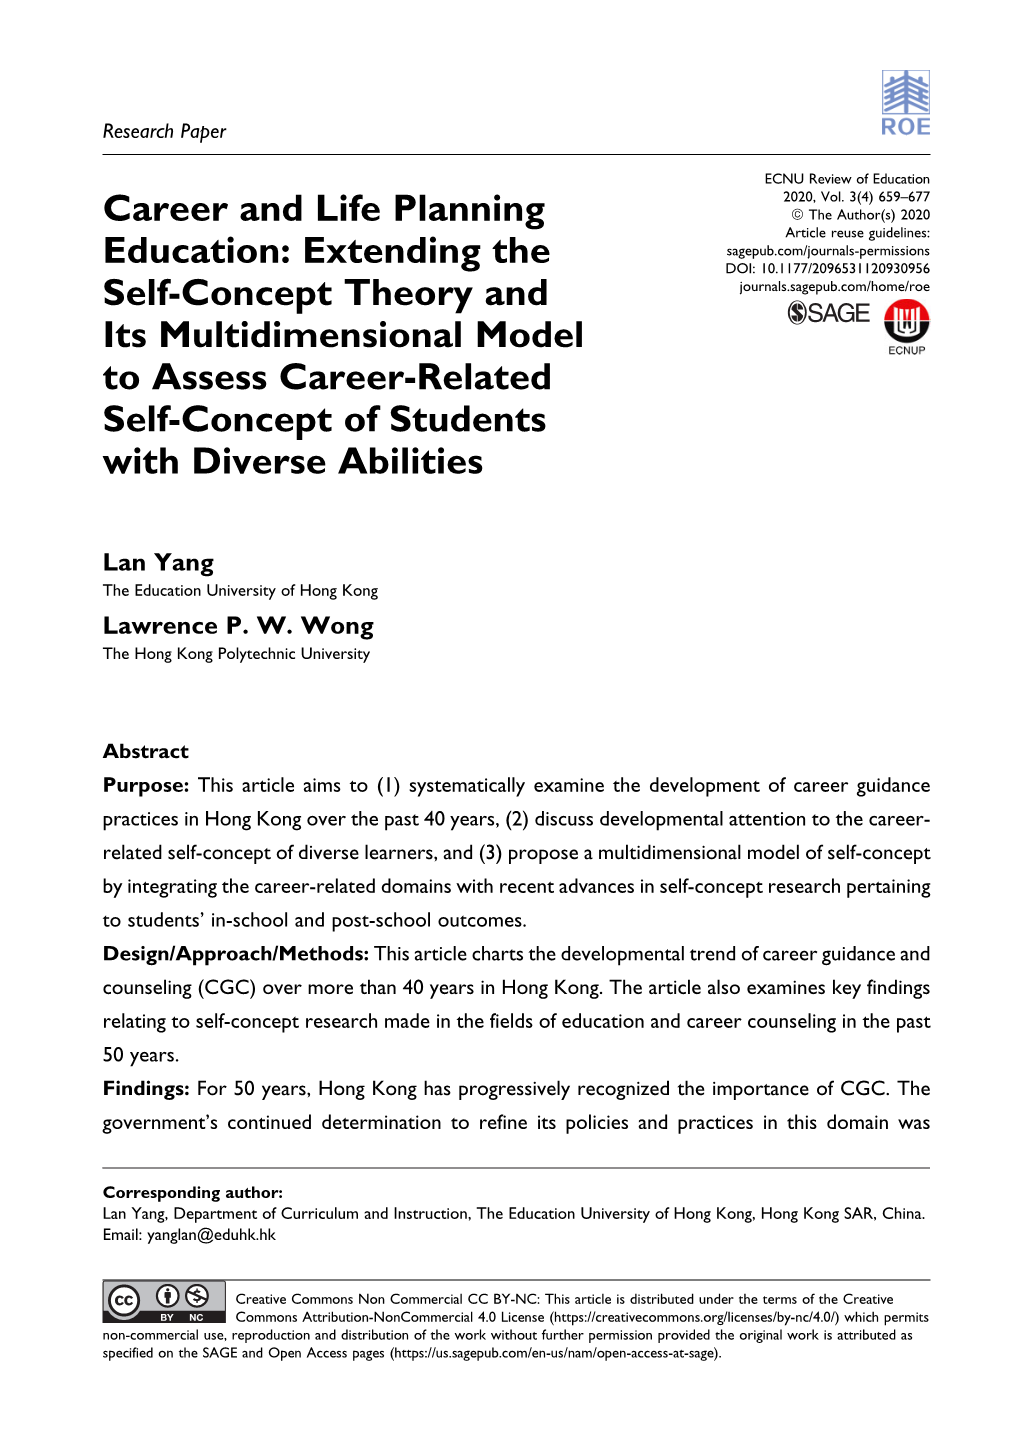 Career and Life Planning Education: Extending the Self-Concept Theory